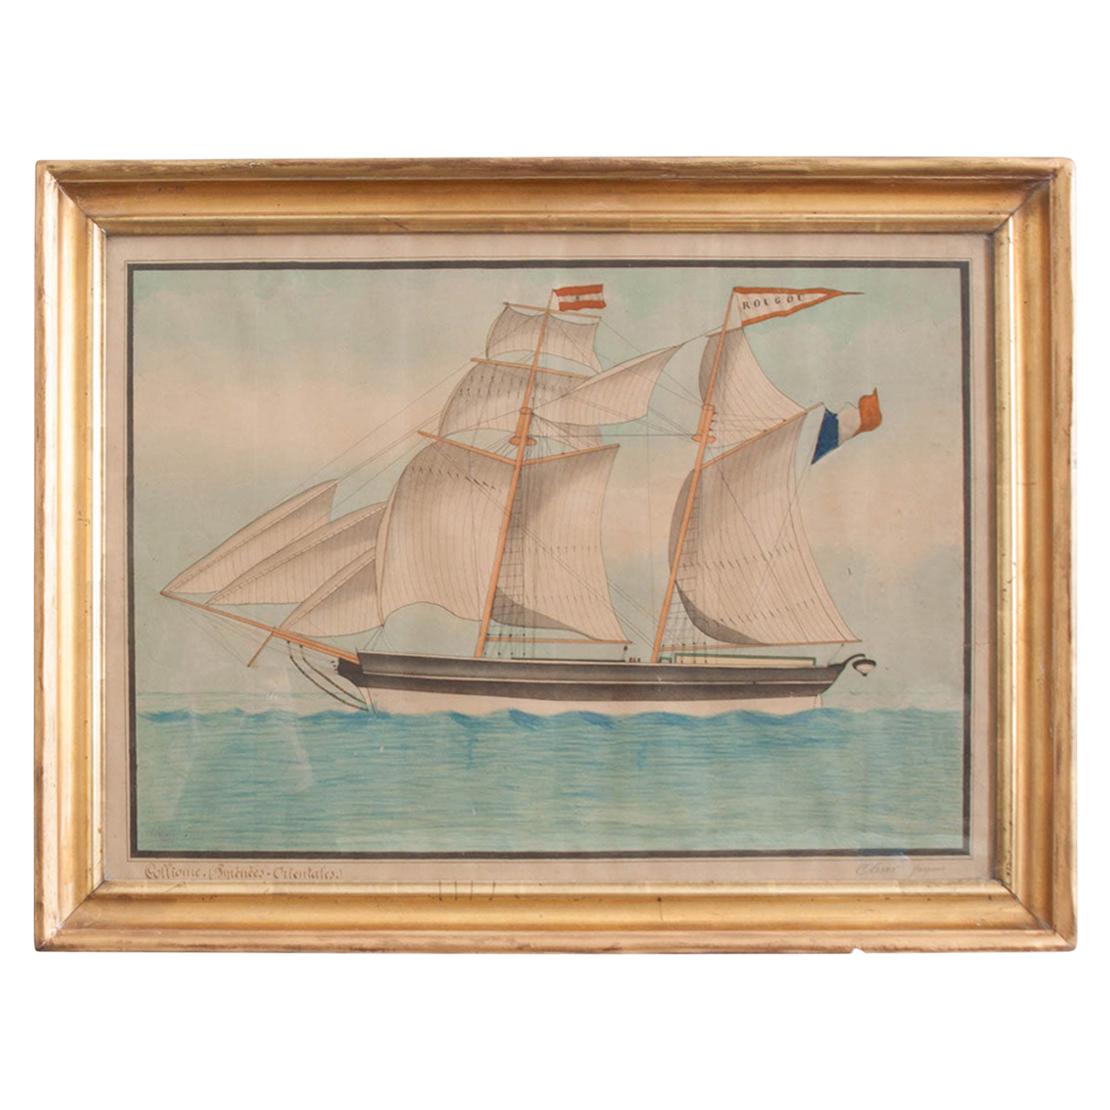 Drawing of French Schooner in Giltwood Frame